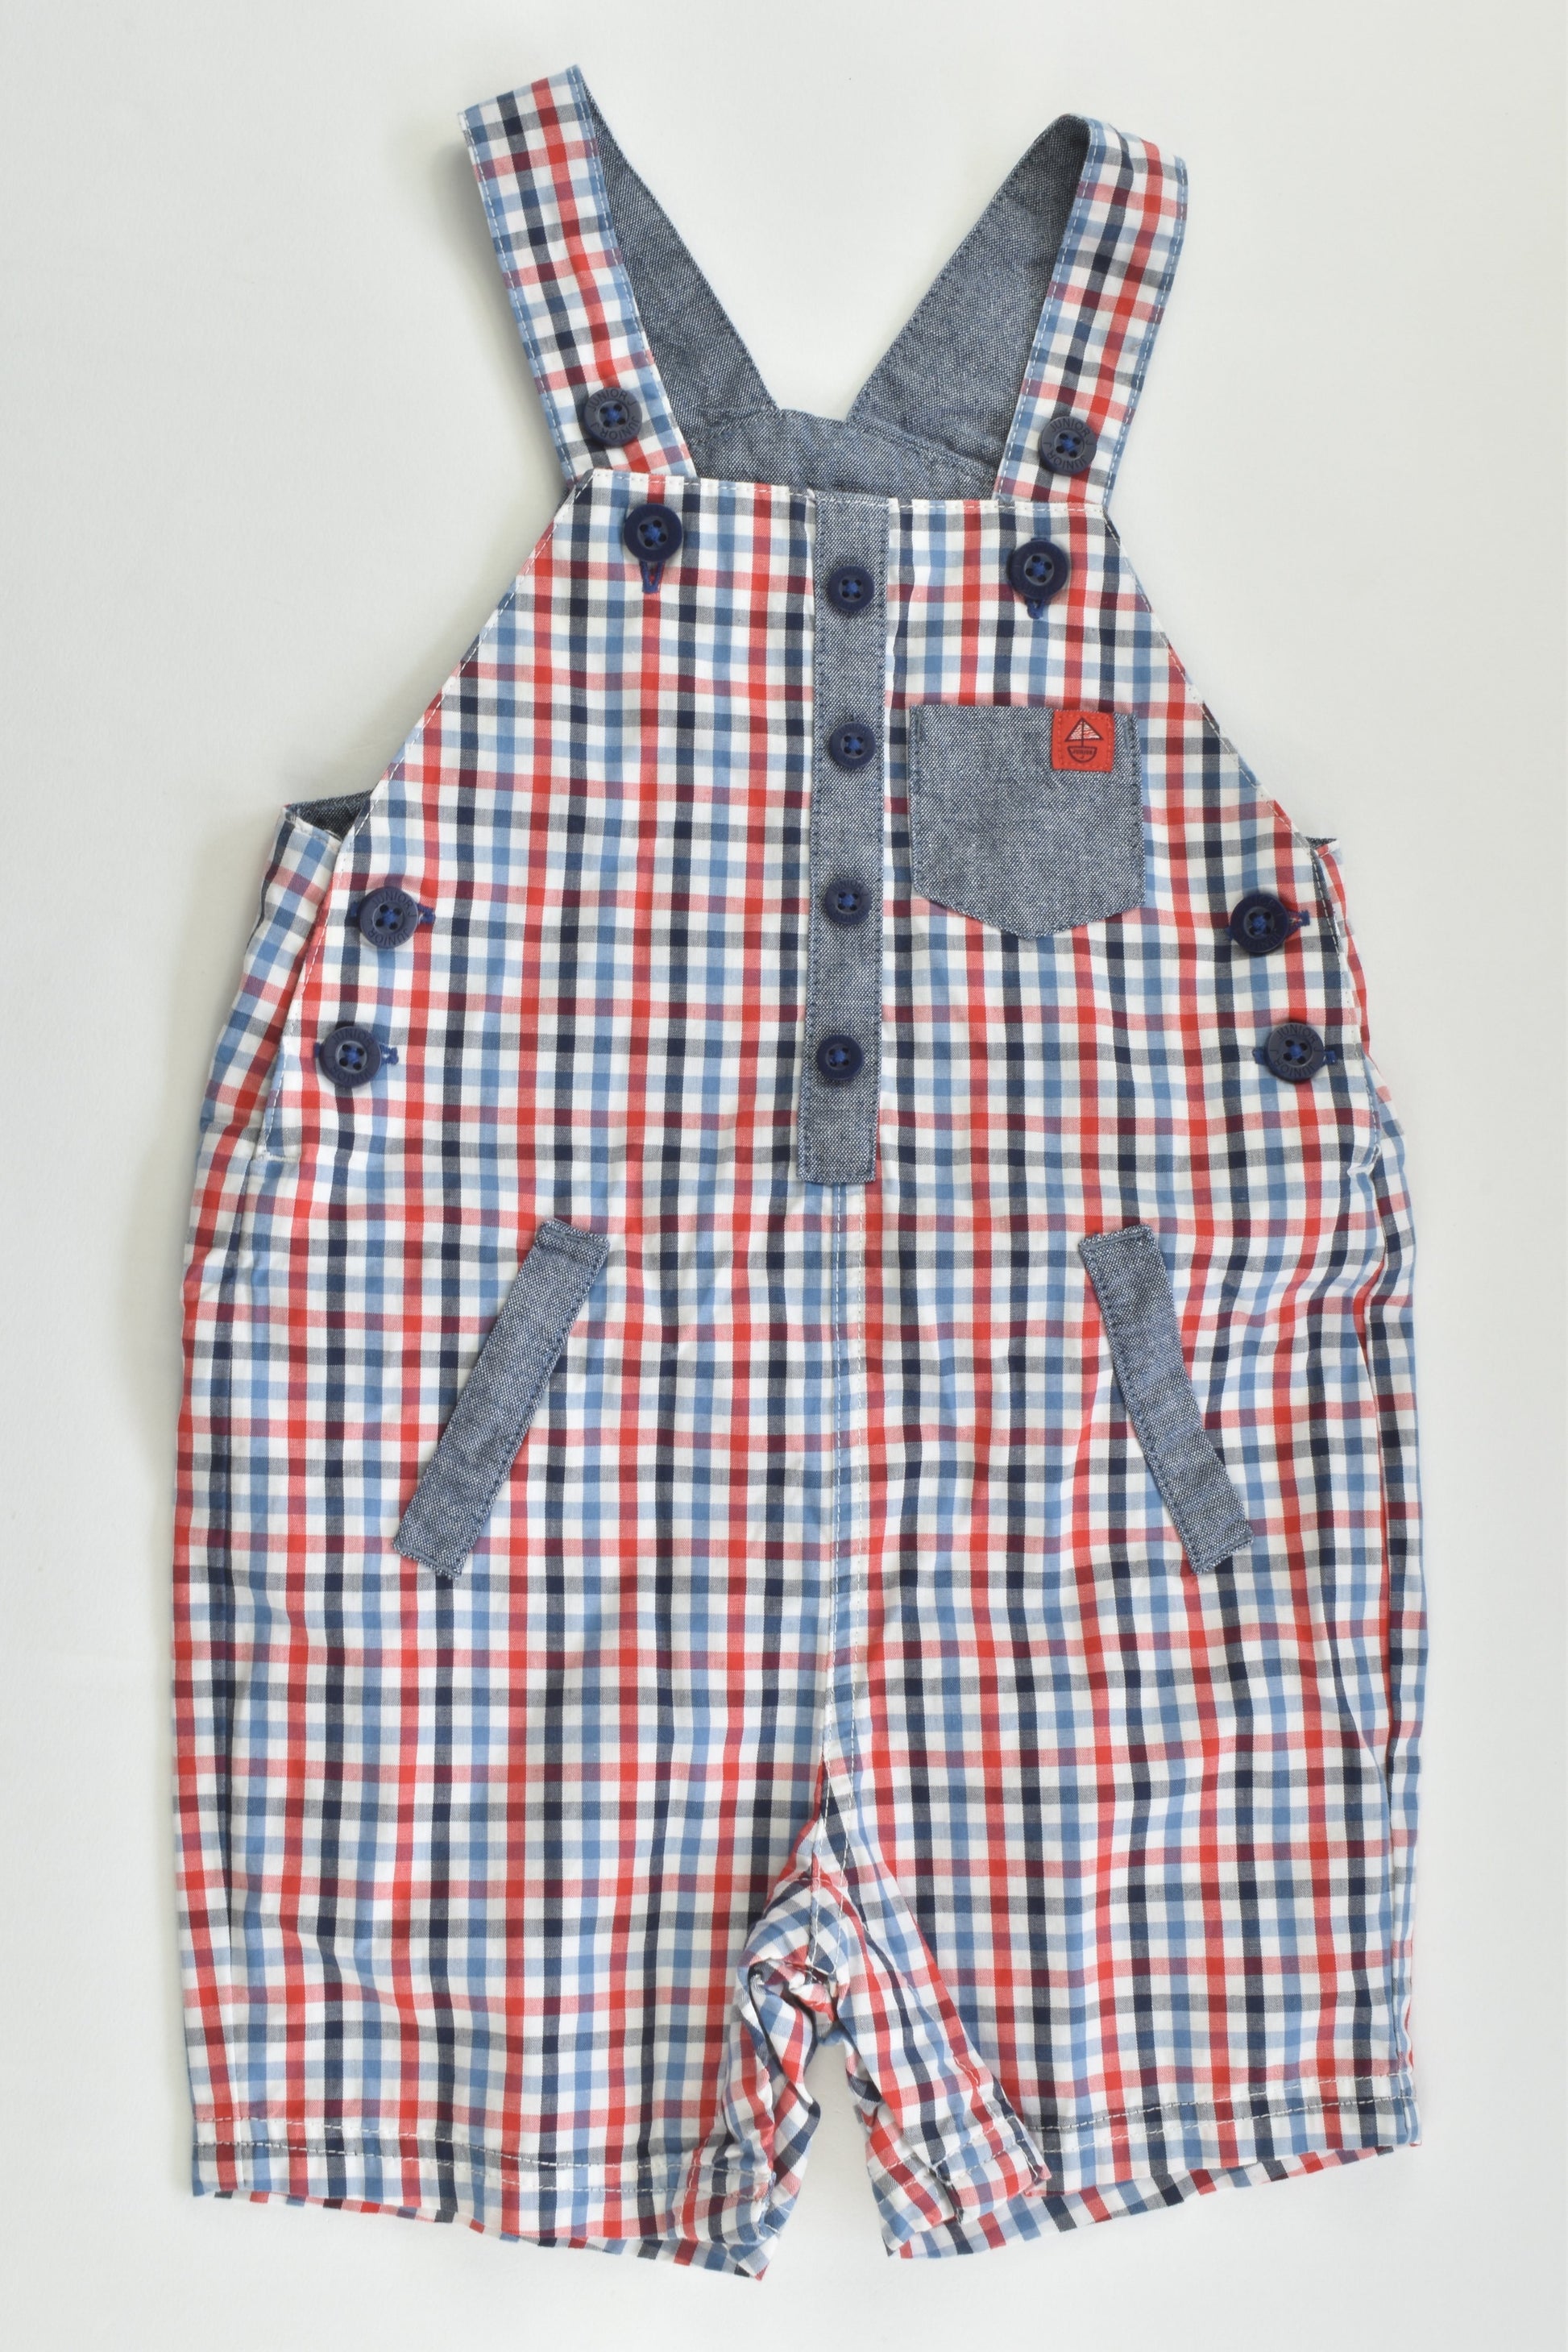 Junior J by Debenhams Size 00 (3-6 months) Checked 'Let The Adventure Begin' Short Overalls